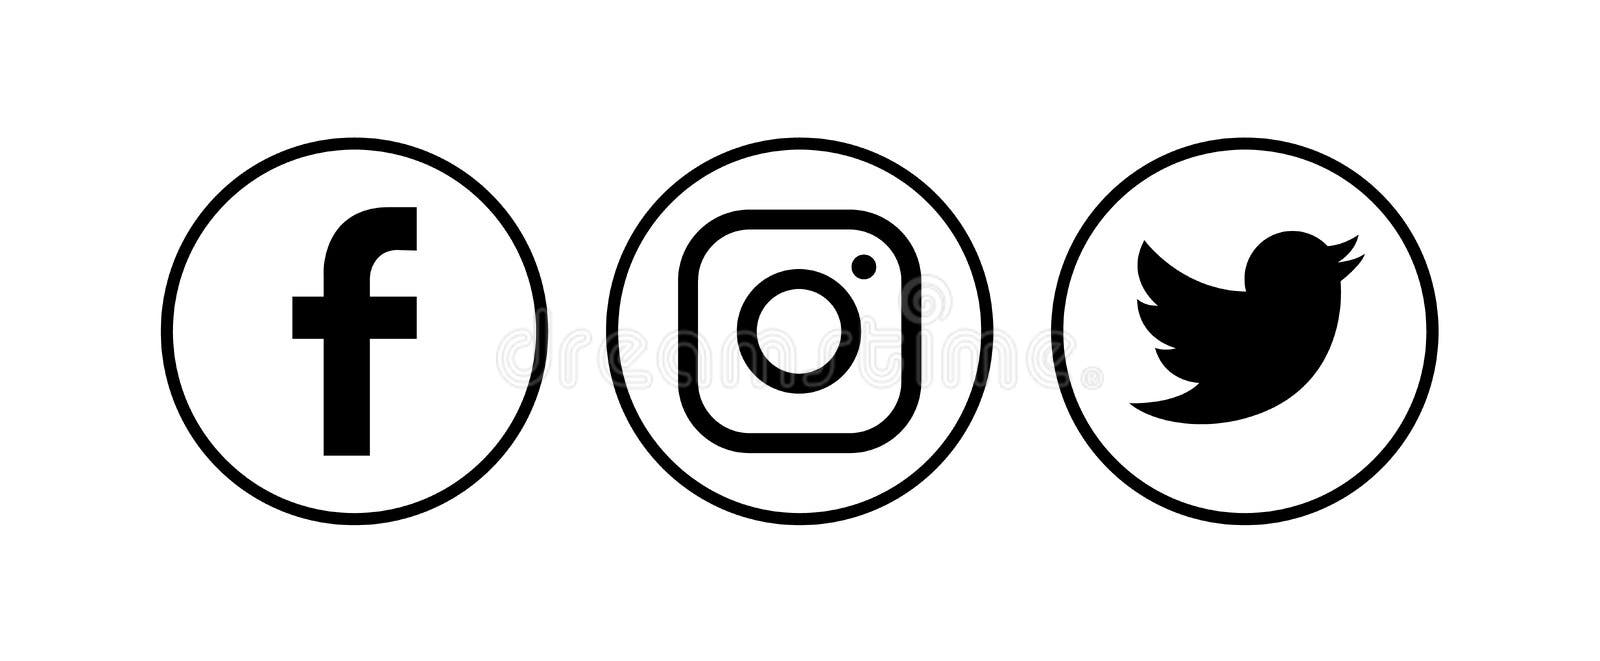 Collection of Popular Round White Social Media Icons Editorial Stock ...